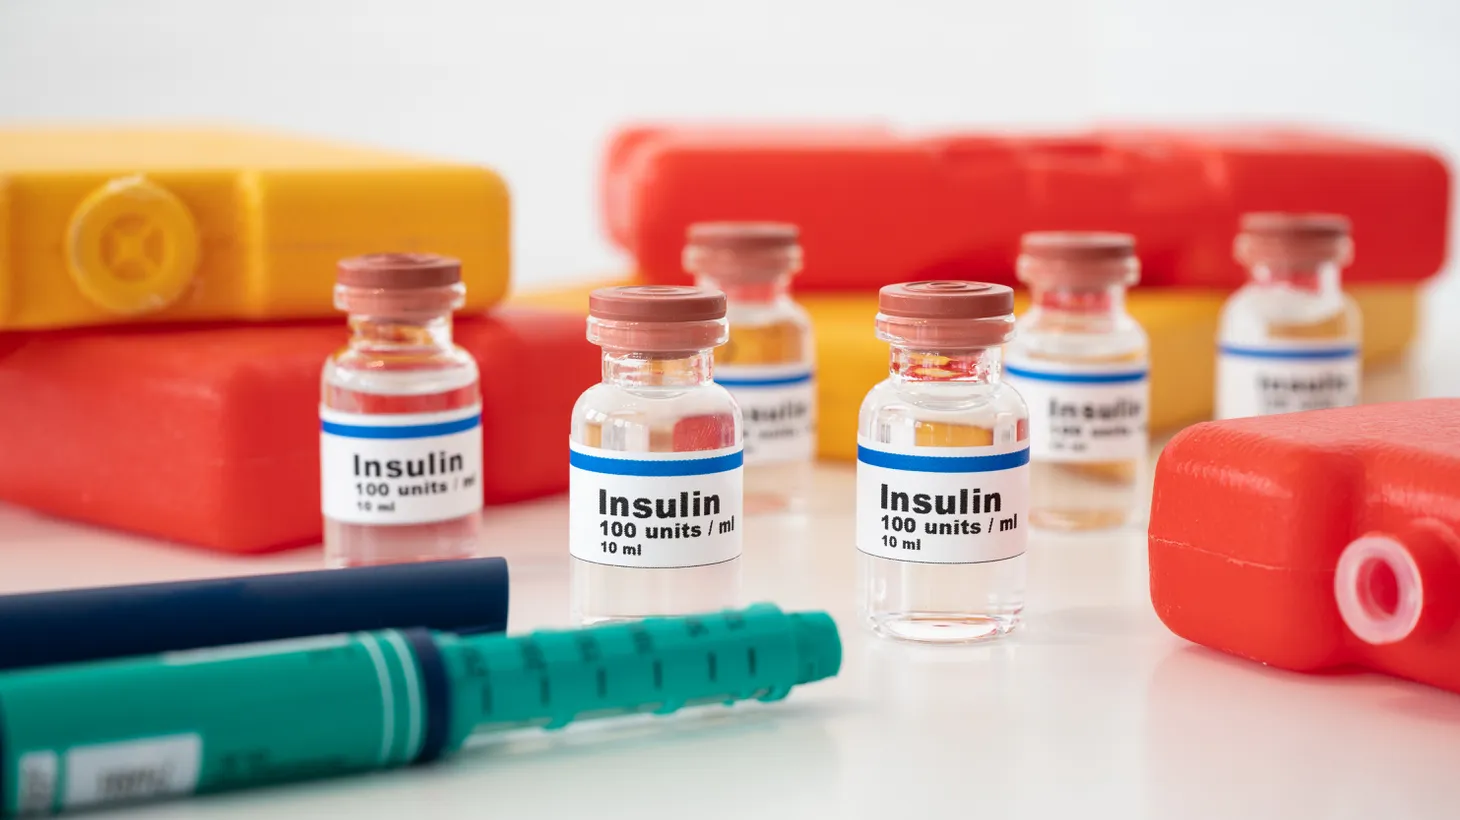 Without insurance, it currently costs $300-400 per vial of insulin. Blame falls to pharmaceutical companies, pharmacy benefit managers (PBMs), and insurance companies, says Angela Hart, senior correspondent for Kaiser Health News.